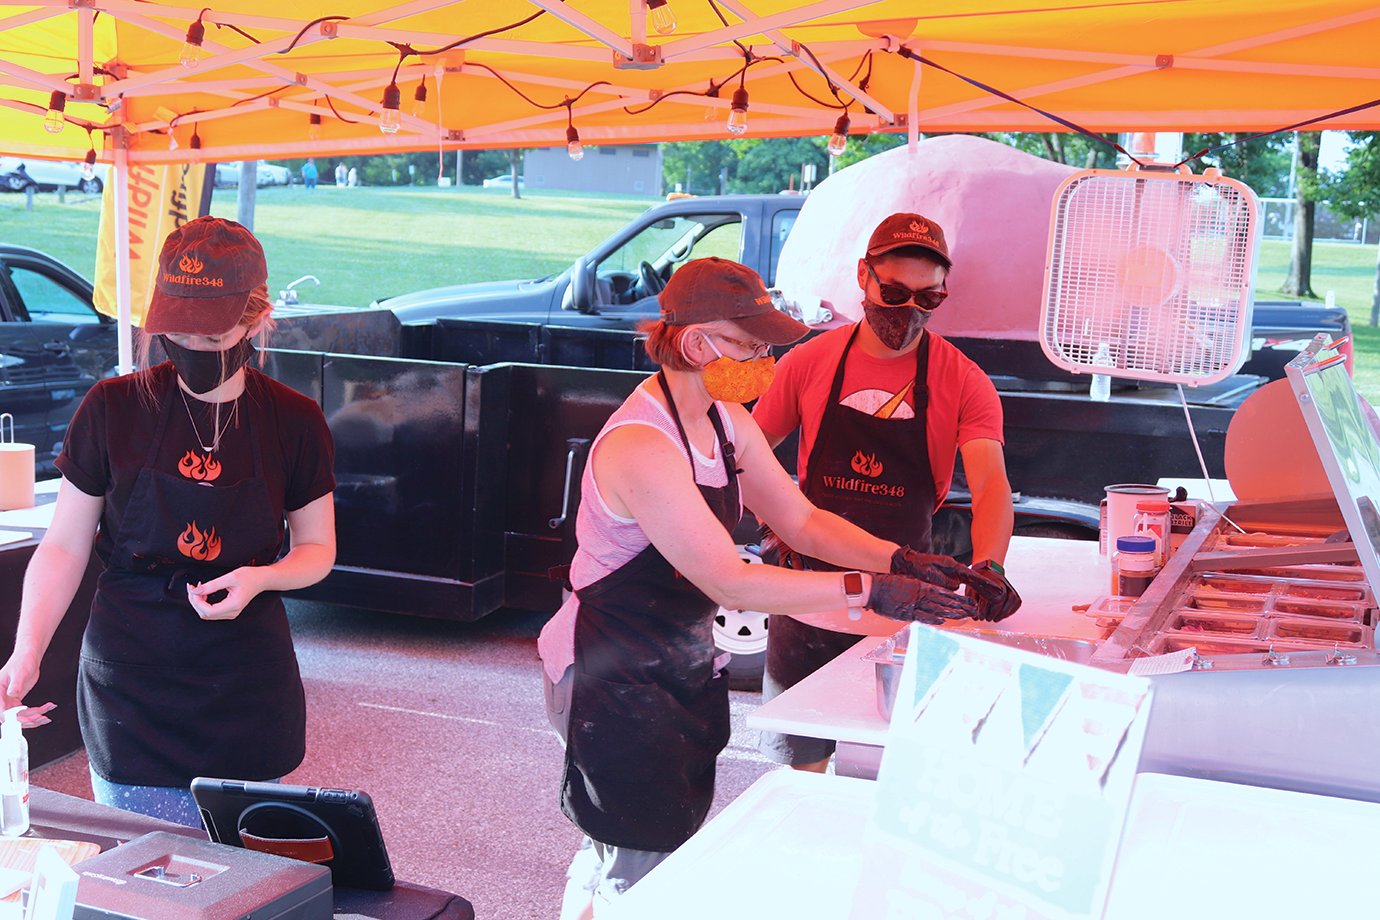 Though few food trucks and tents were available Saturday at Milligan Park, Wildfire 348 crew members Faith Galbert, from left, Kelly Green and Zach Green set up shop alongside Baldwin Memoral Field at Milligan Park ahead of Fourth of July celebrations.